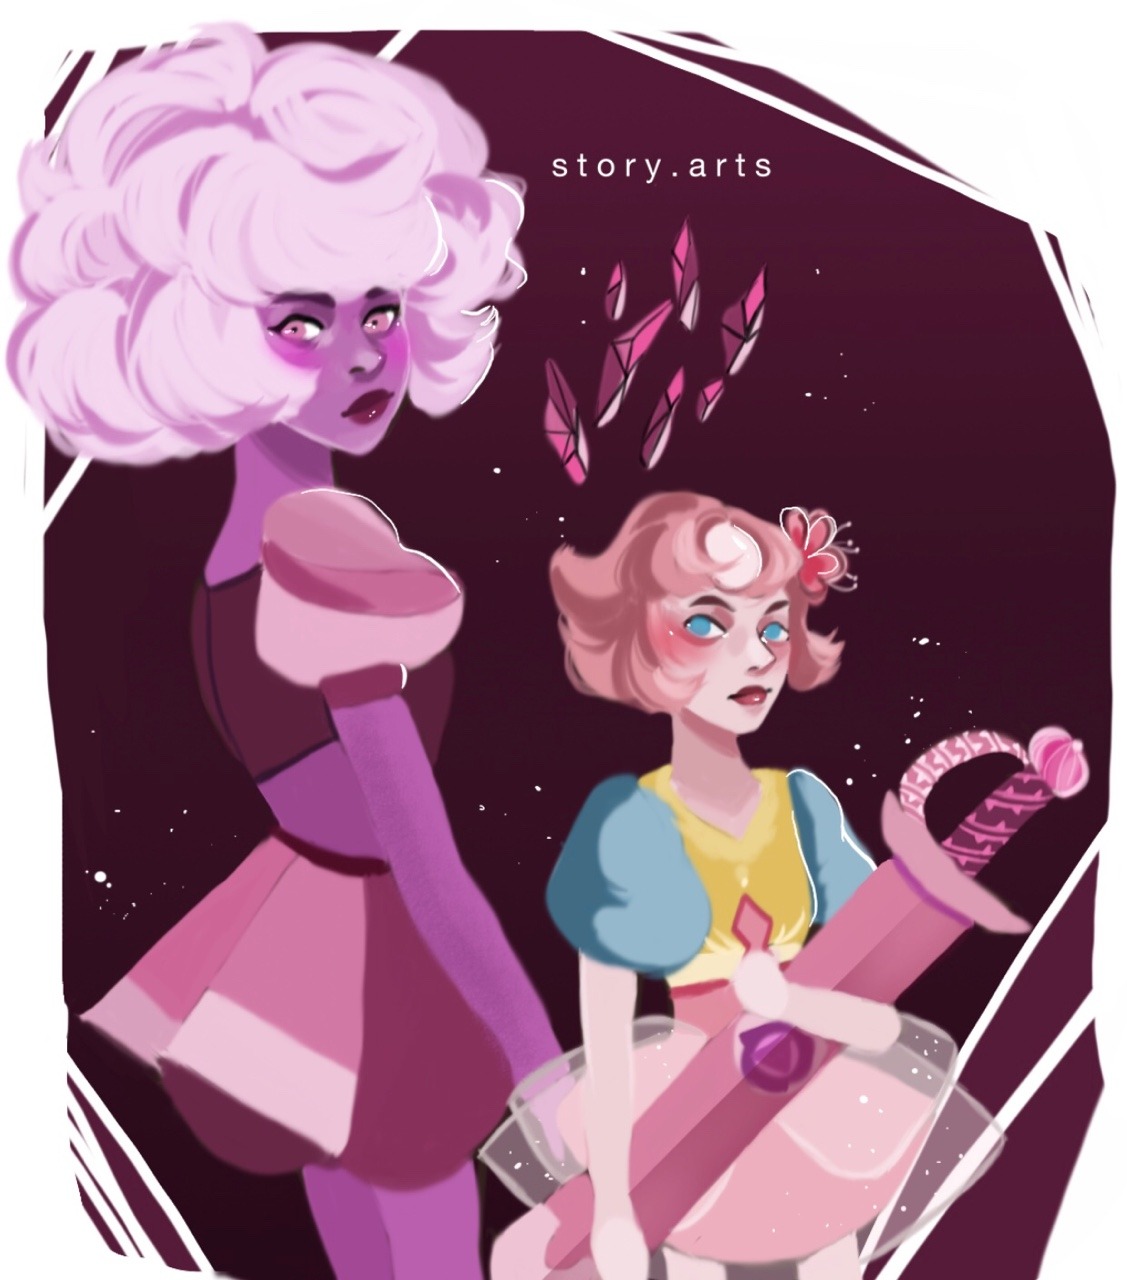 I’m late but I finally drew something for “A Single Pale Rose”